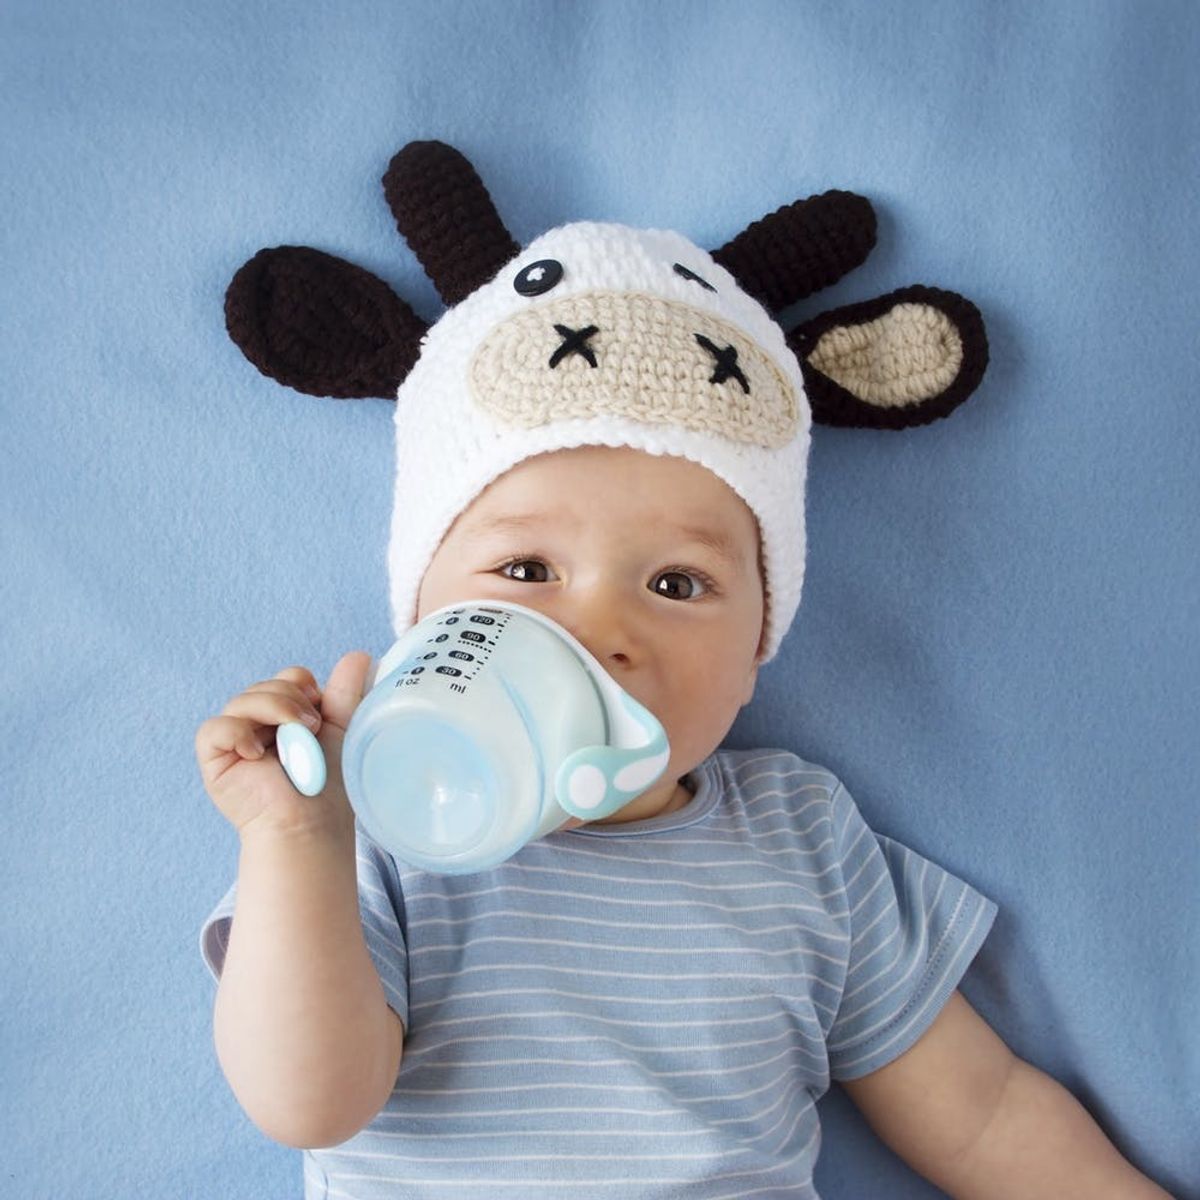 3 Tips to Help Your Toddler Switch from Nursing to Drinking Milk